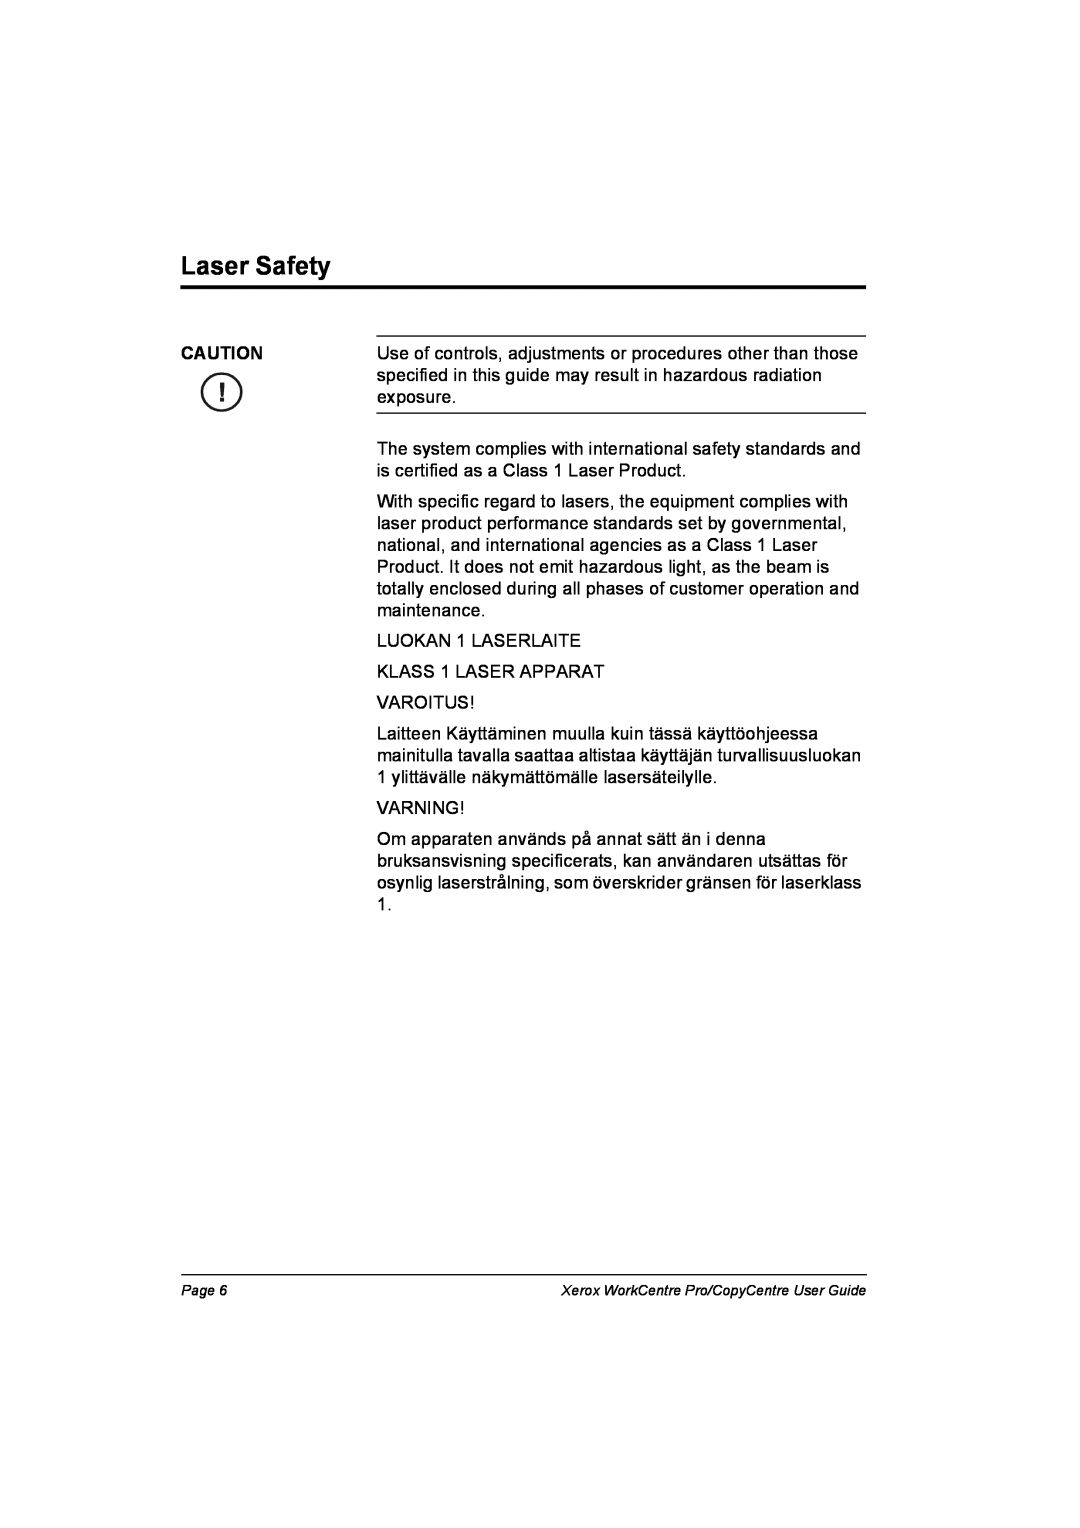 Xerox C90, C75, C65, WorkCentre Pro 75 manual Laser Safety 